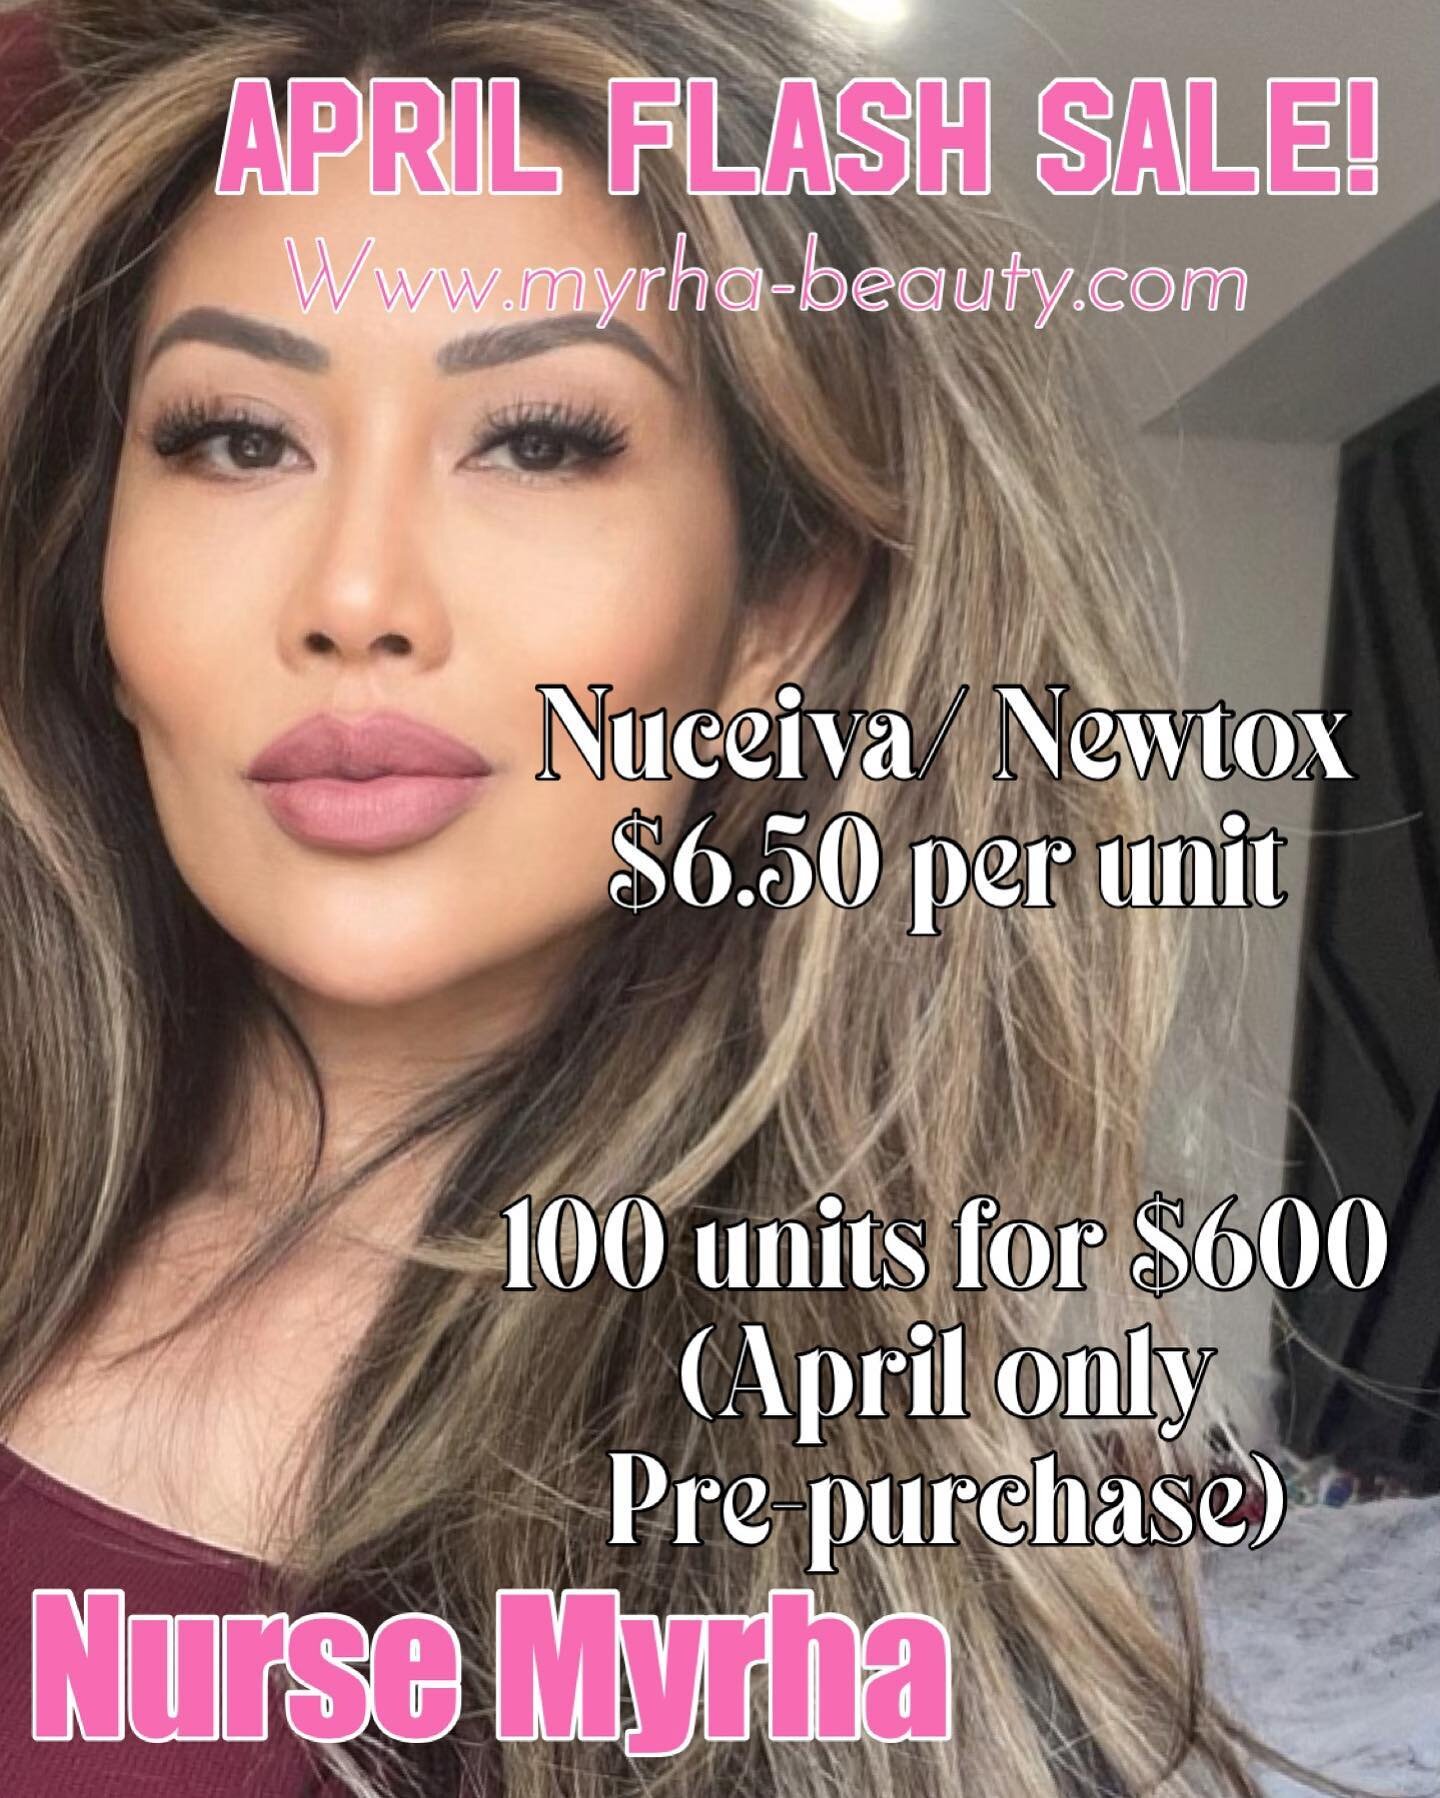 My flash sale for April only! And the price goes back to regular price. 
⠀
🅜🅨 🅦🅞🅡🅚 #6ixlips #myrhalips
𝙁𝙤𝙧 𝙋𝙧𝙤𝙛𝙚𝙨𝙨𝙞𝙤𝙣𝙖𝙡 𝙥𝙖𝙜𝙚, 𝙫𝙞𝙨𝙞𝙩:
𝗣𝗜𝗖𝗢𝗦𝗨𝗥𝗘 𝗣𝗥𝗢 𝗟𝗔𝗦𝗘𝗥 @freelovebeautyhealth
𝗙𝗔𝗖𝗘 𝗪𝗢𝗥𝗞&nbsp;&nbsp;&